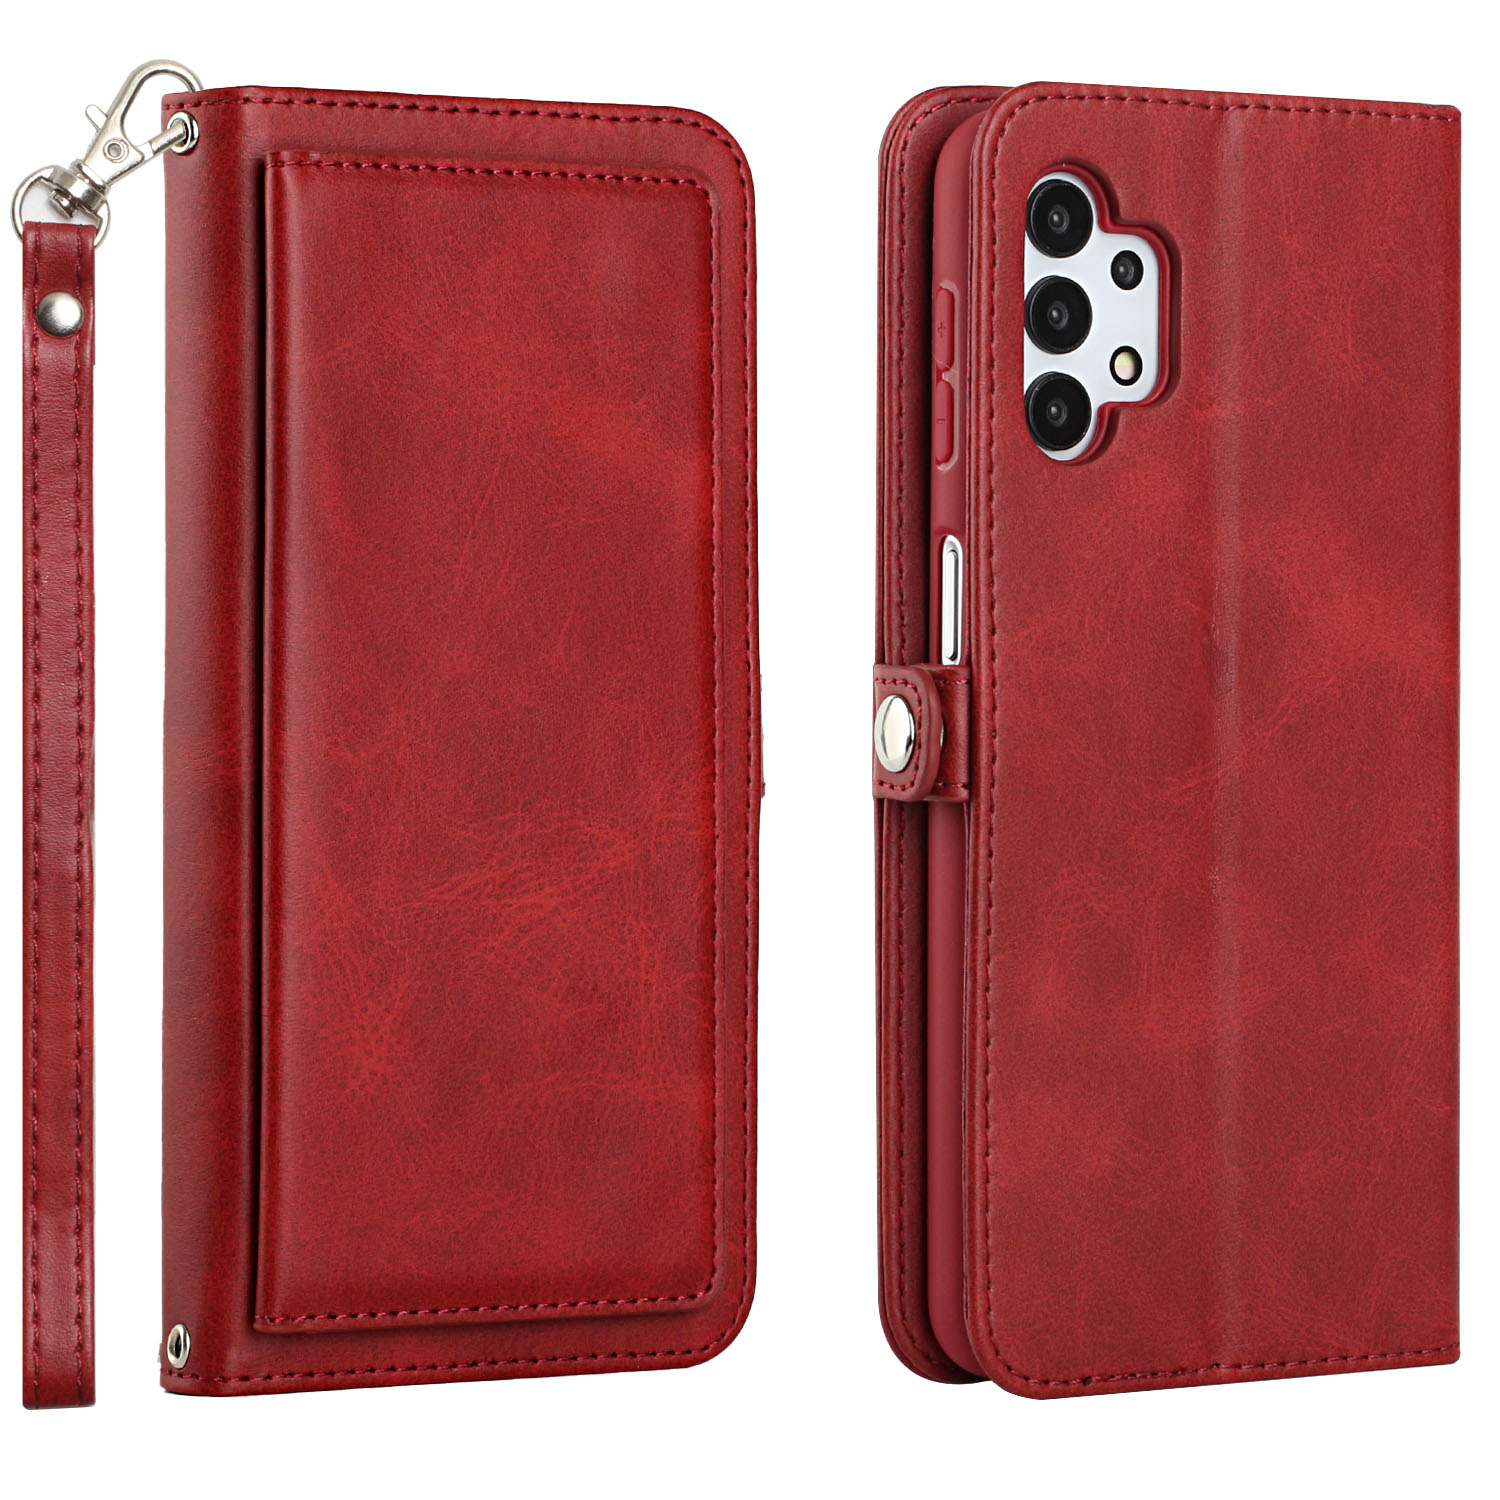 Premium PU Leather Folio WALLET Front Cover Case for Galaxy A32 5G (Red)